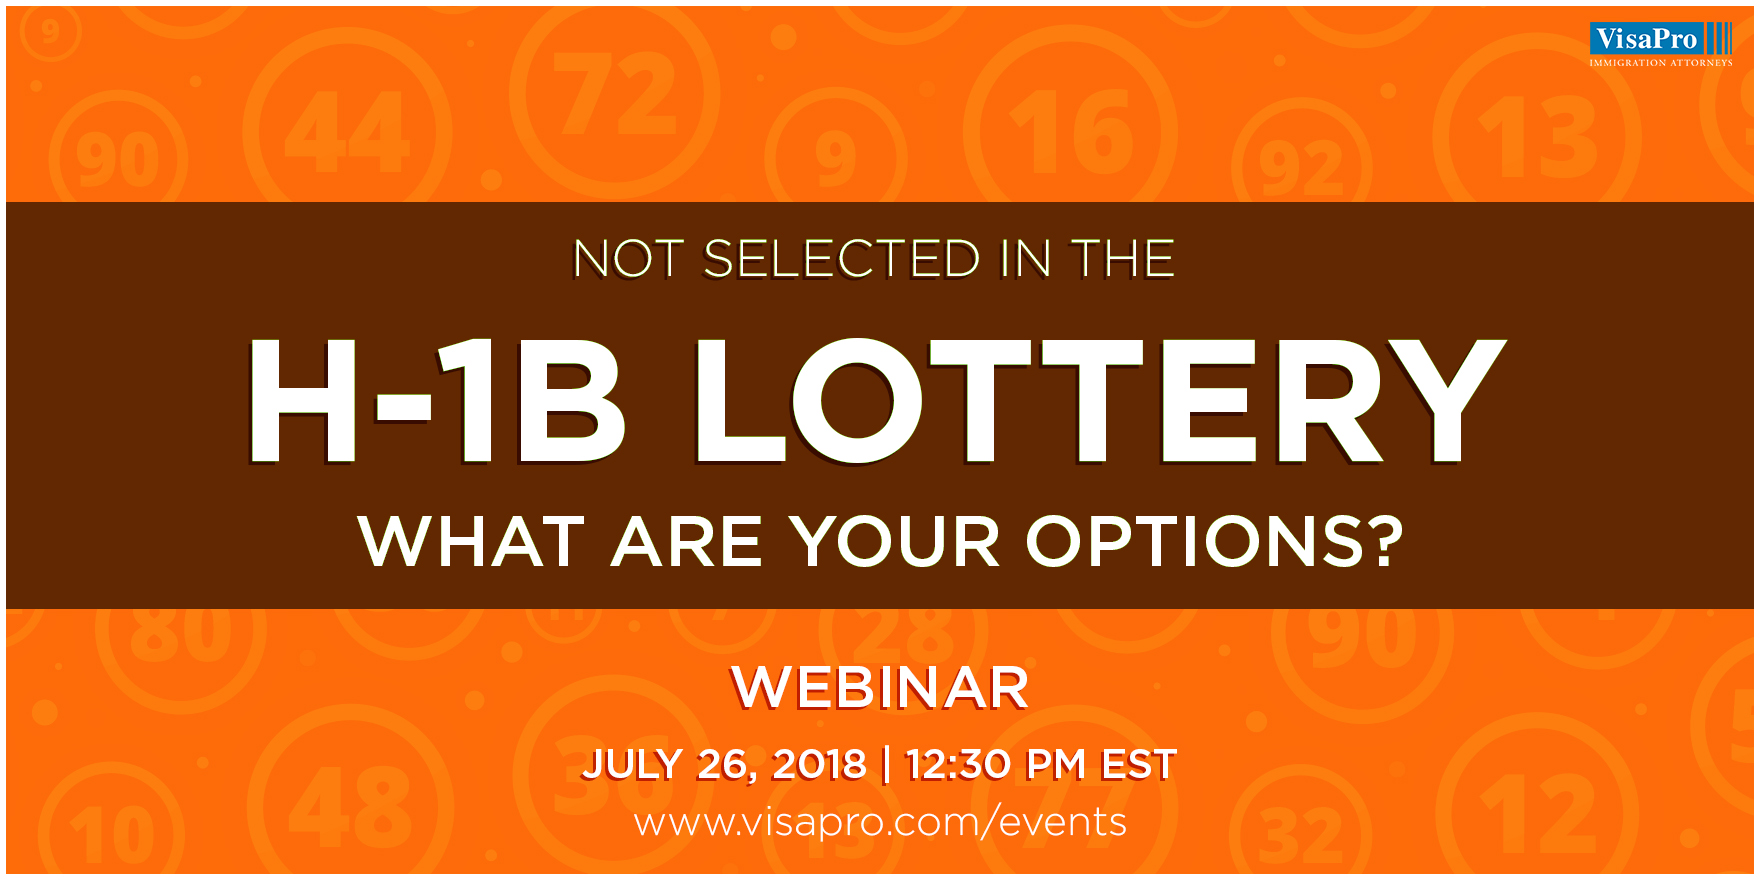 Not Selected In The H-1B Lottery: What Are Your Options?, Sydney, New South Wales, Australia